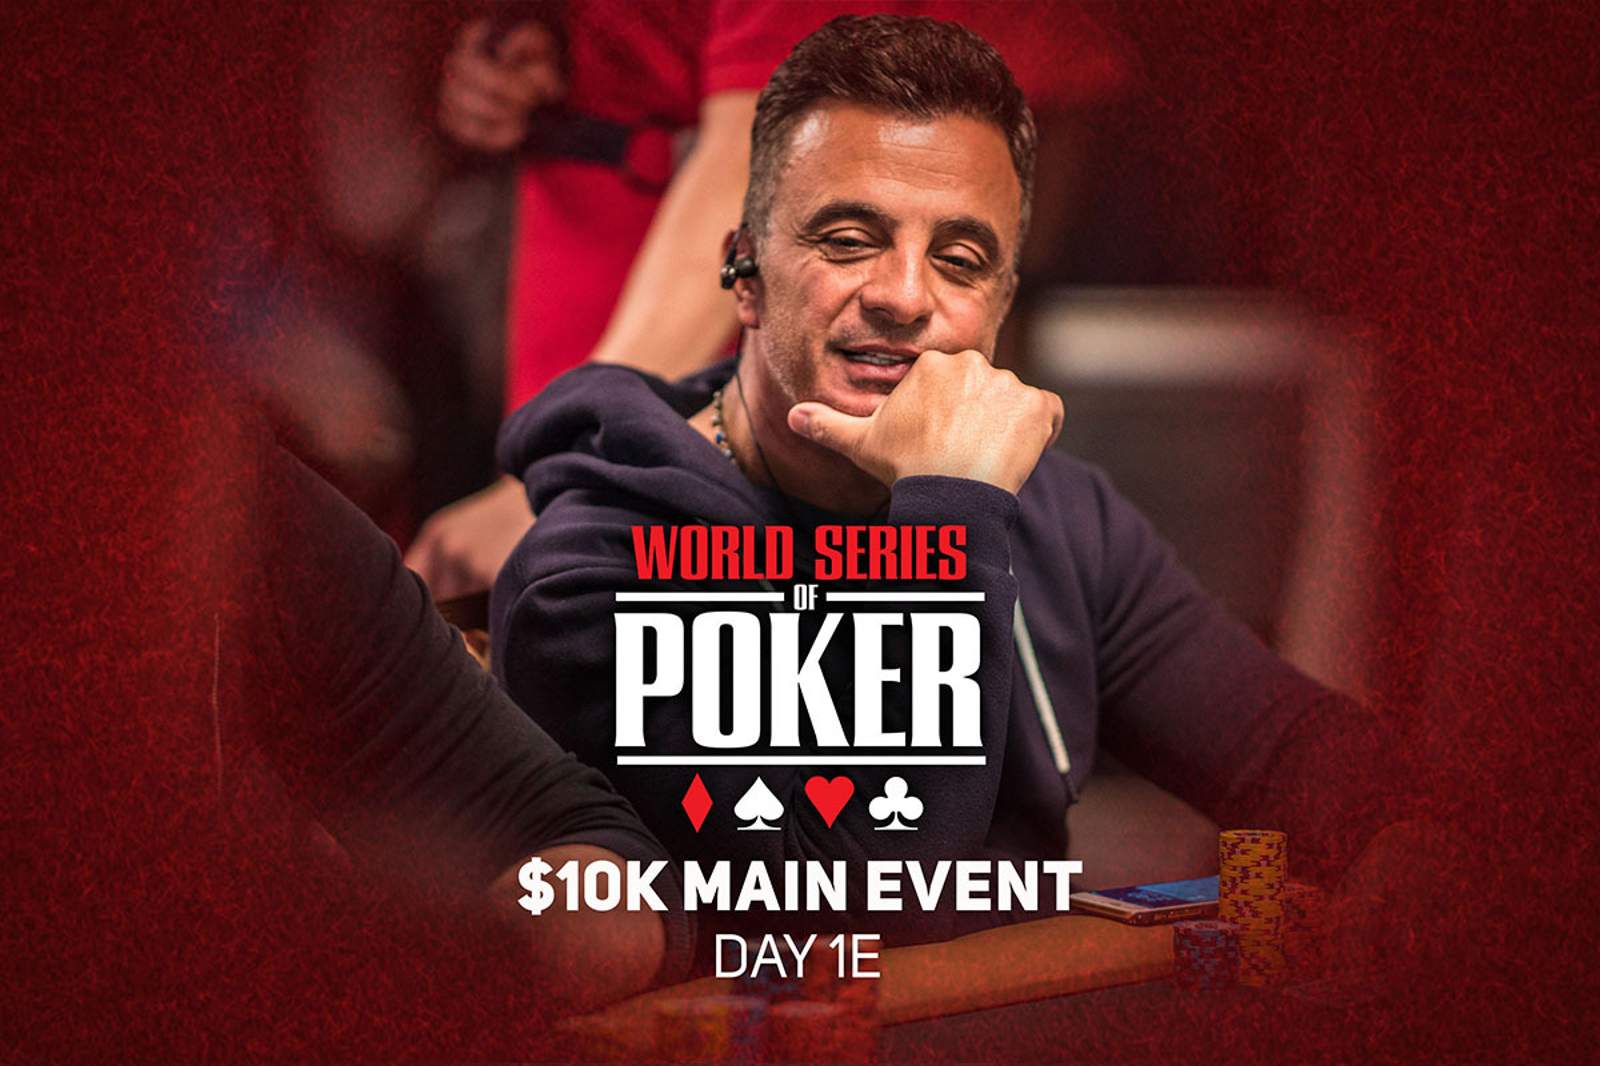 Watch Day 1E of the 2021 WSOP Main Event on PokerGO.com at 7:30 p.m. ET